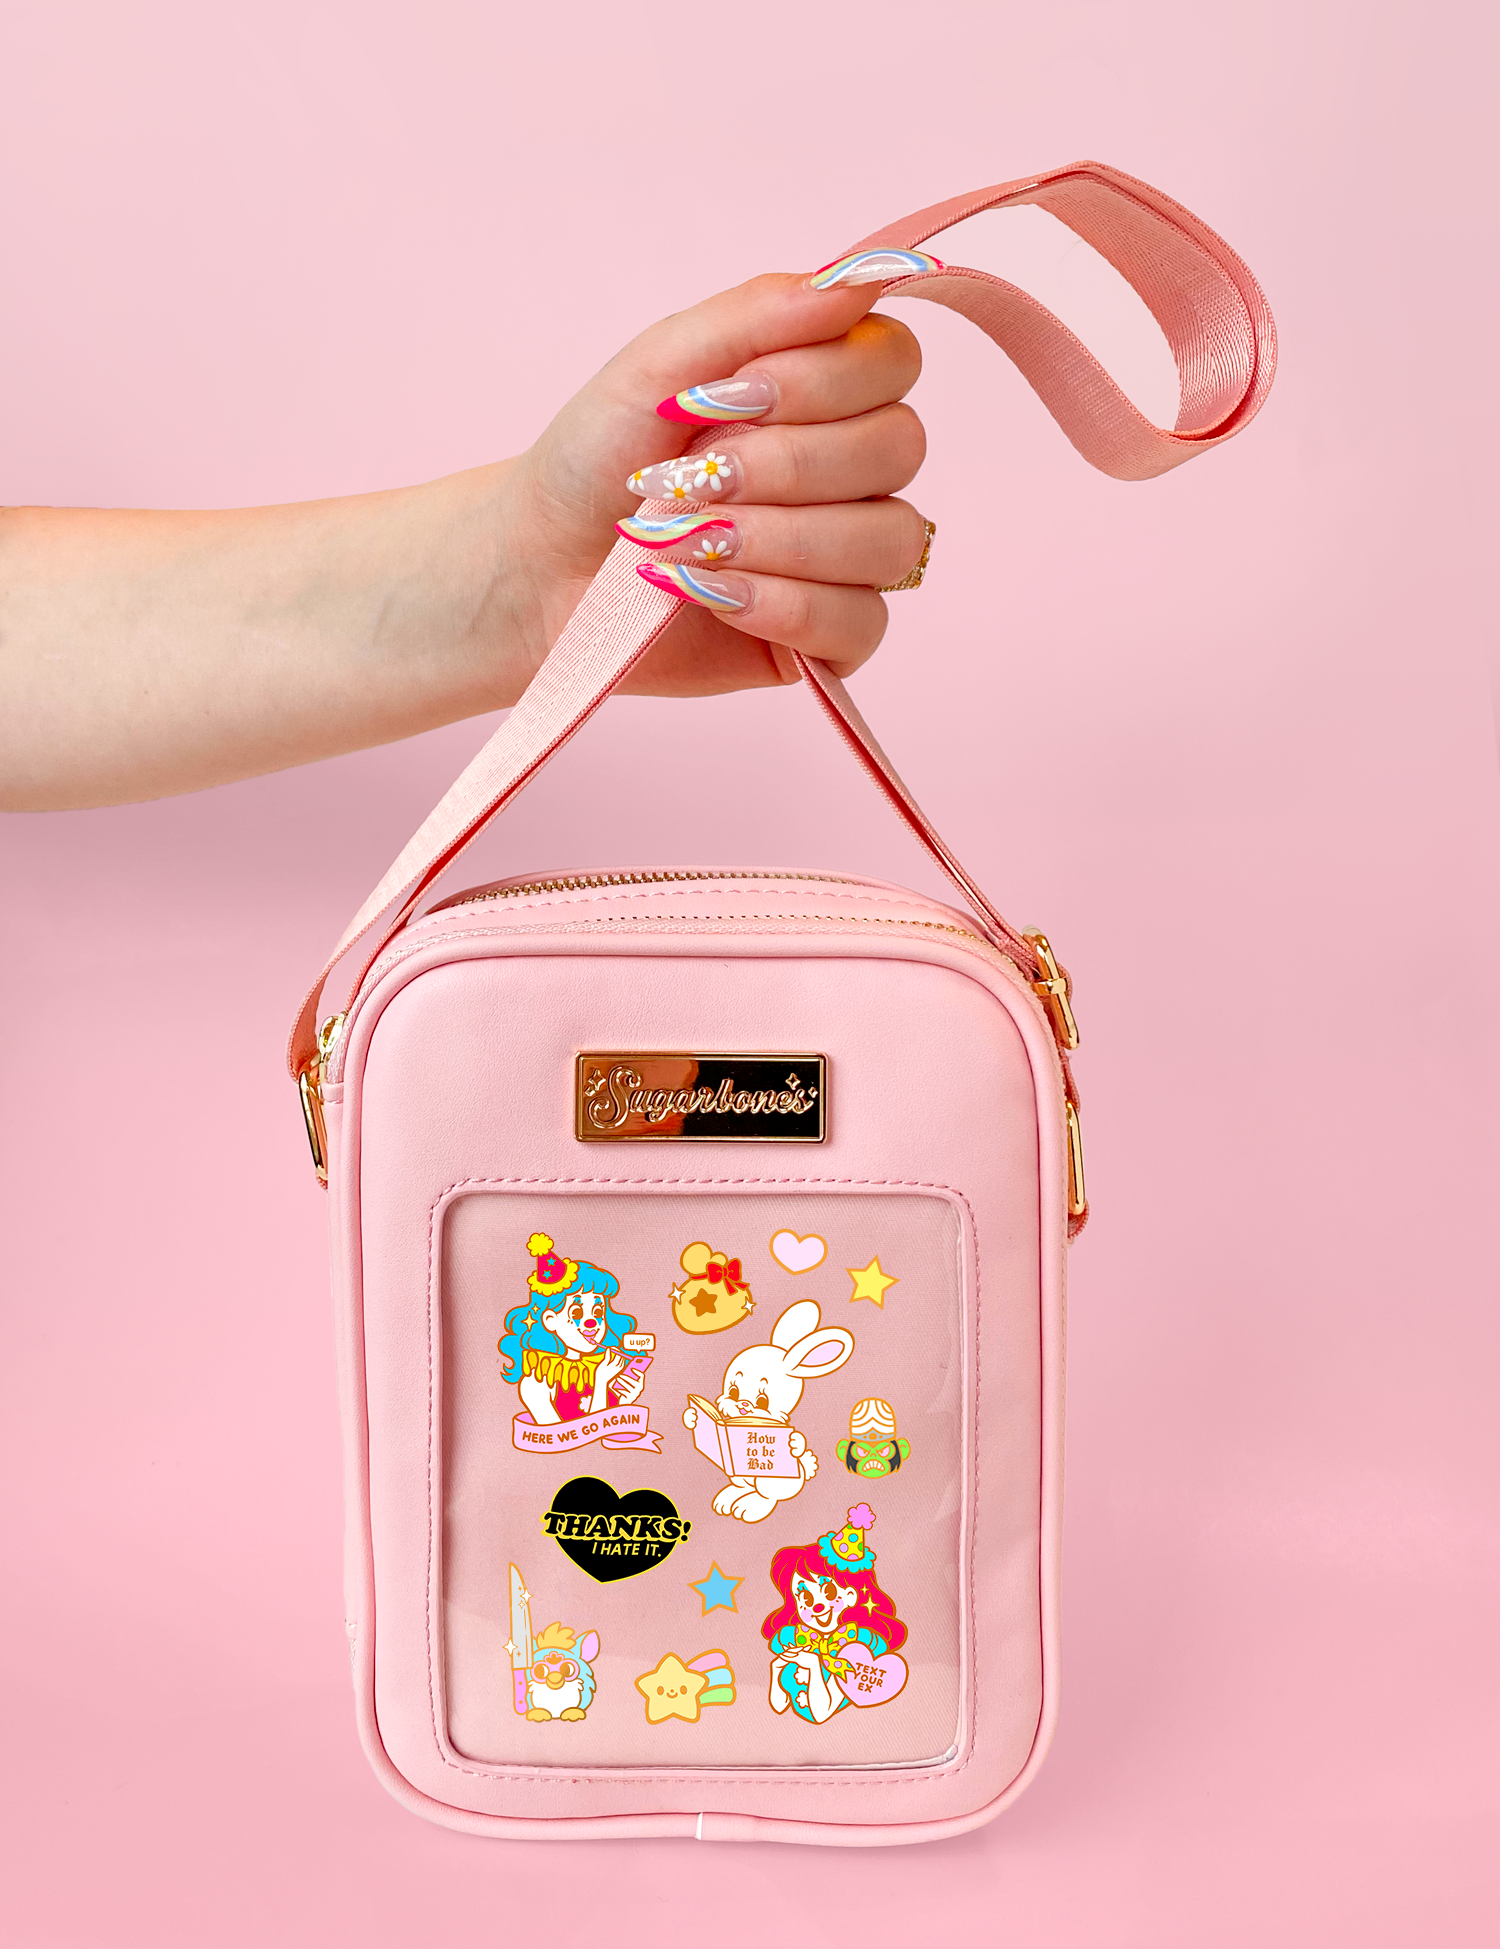 pinkbagwithpins.png